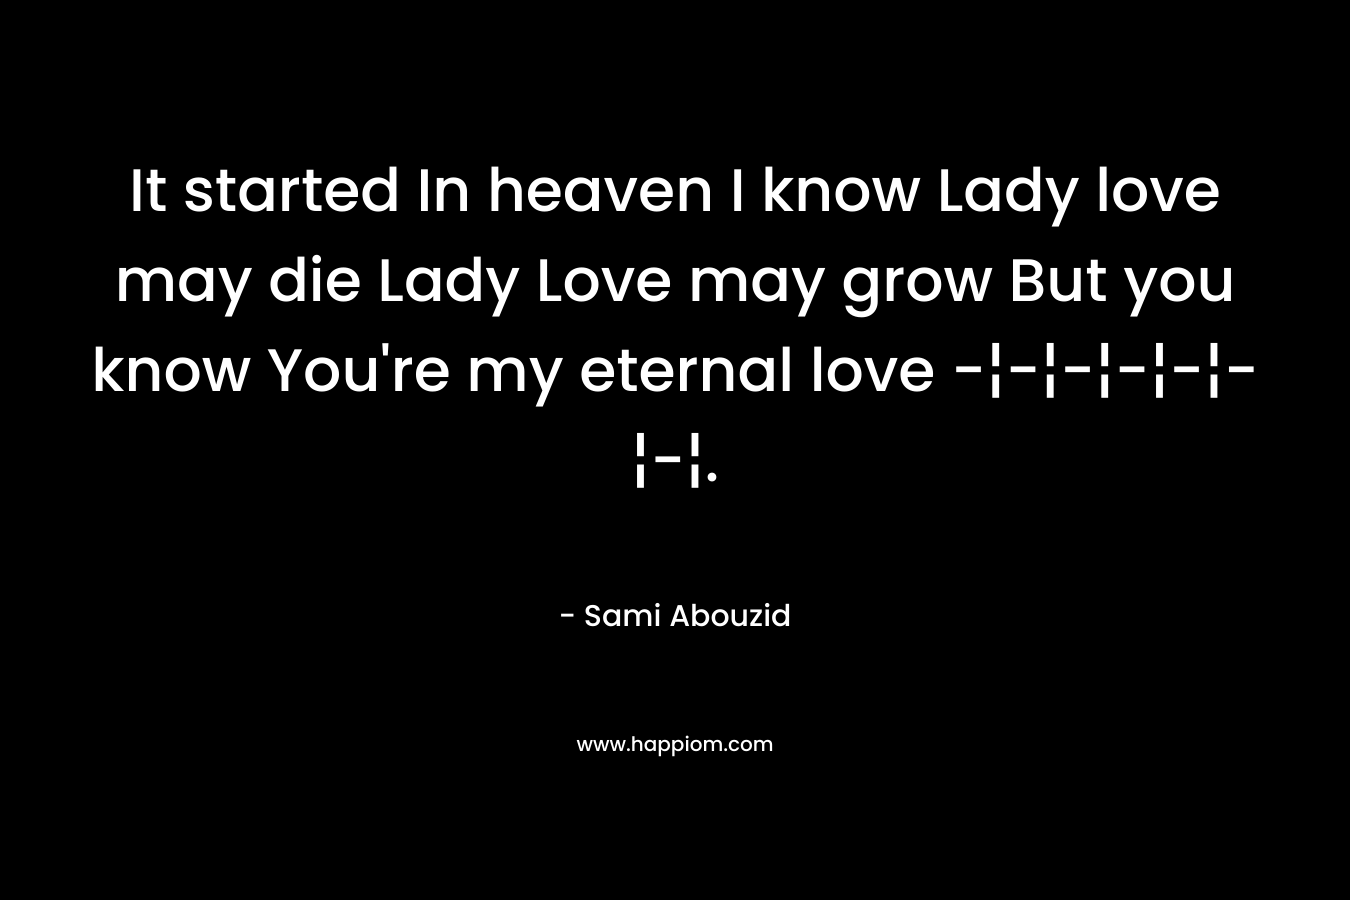 It started In heaven I know Lady love may die Lady Love may grow But you know You're my eternal love -¦-¦-¦-¦-¦-¦-¦.